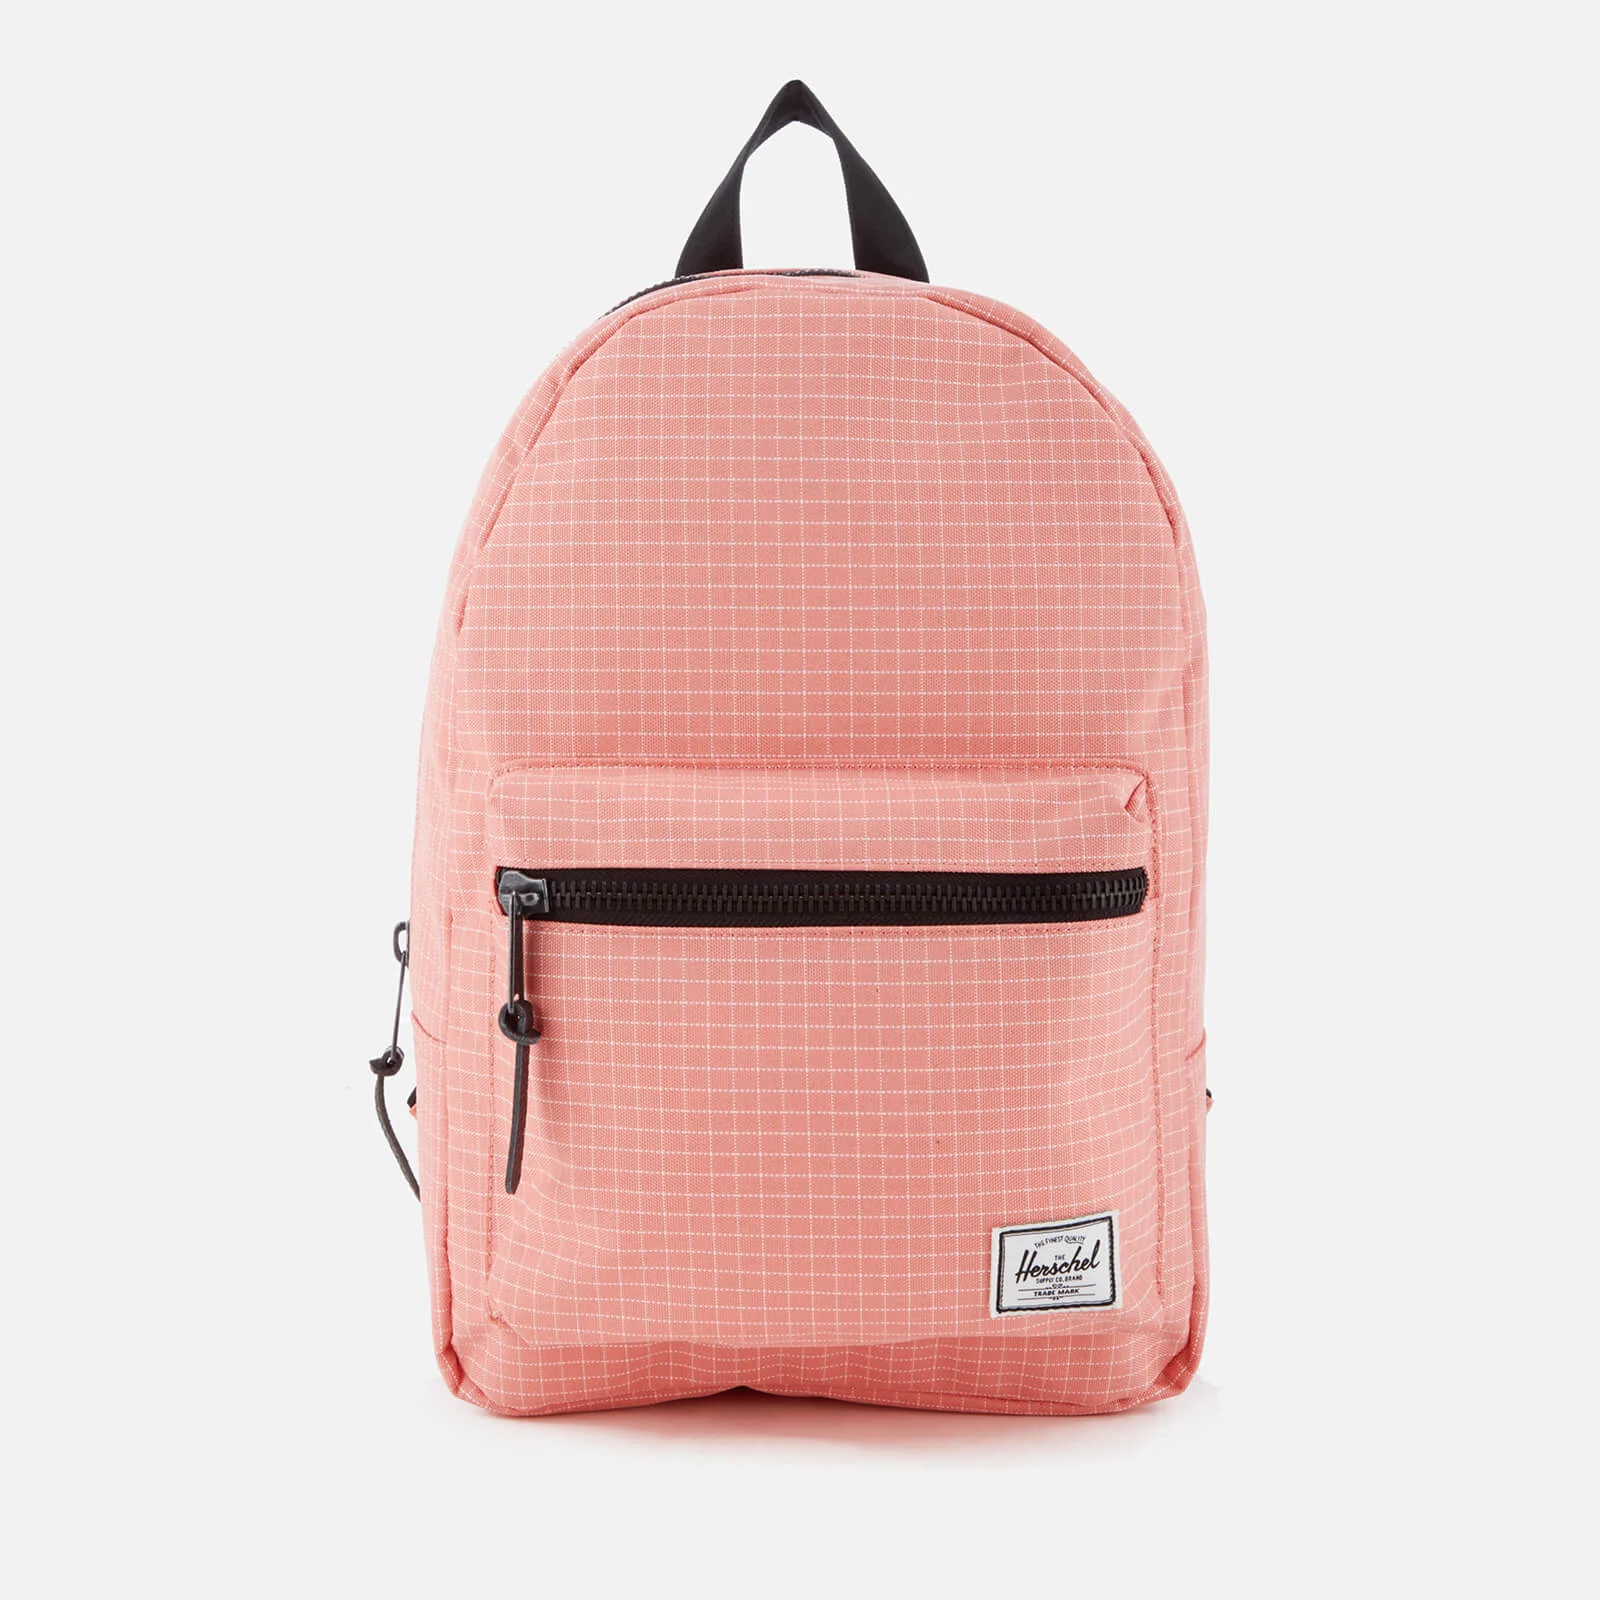 Herschel Supply Co. Grove Backpack - Strawberry Ice Grid - XS Image 1